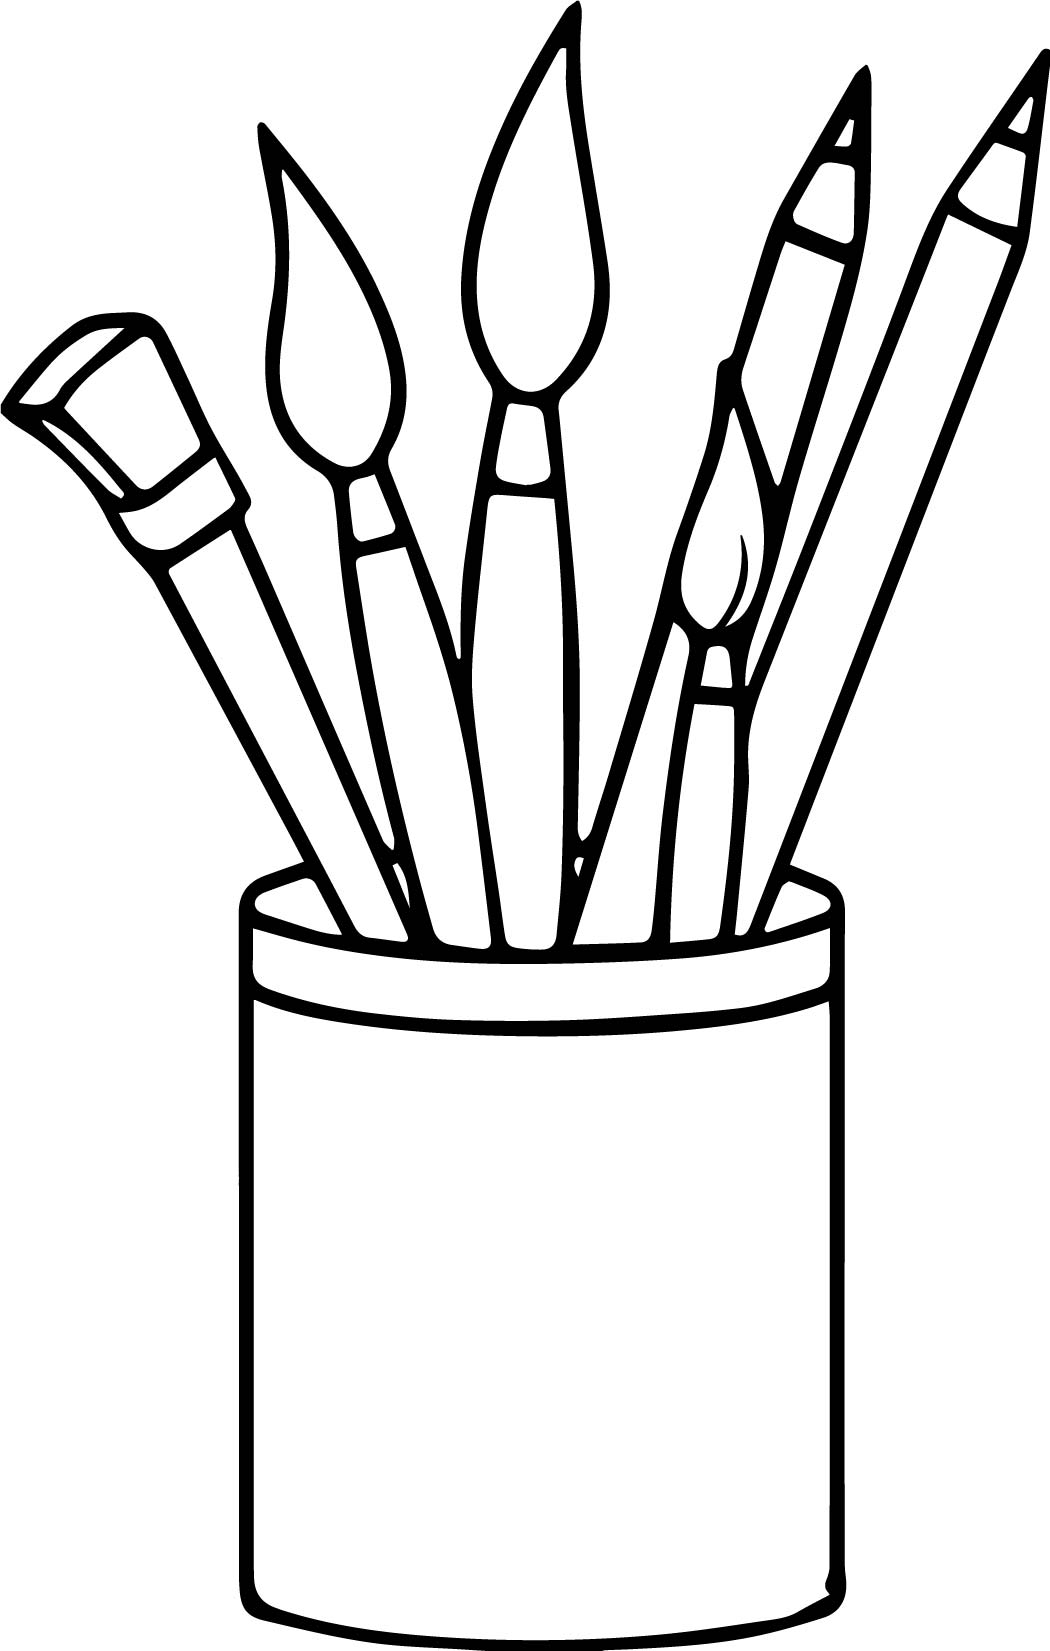 Art Supplies Coloring Pages Free download on ClipArtMag